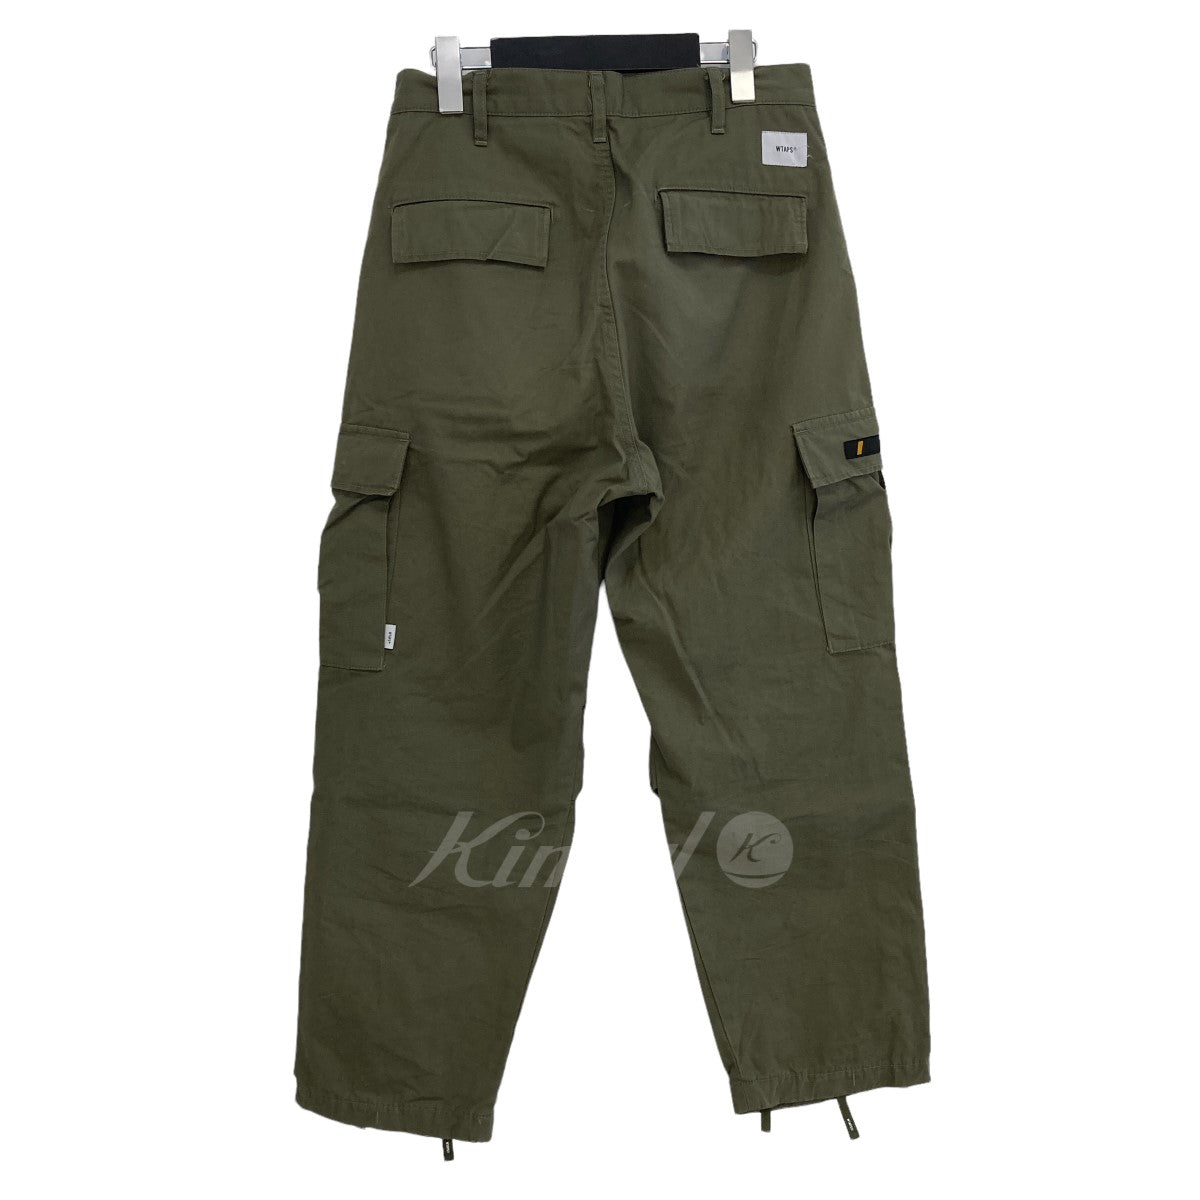 WTAPS(ダブルタップス) 21SS JUNGLE STOCK ／ TROUSERS ／ COTTON． RIPSTOP